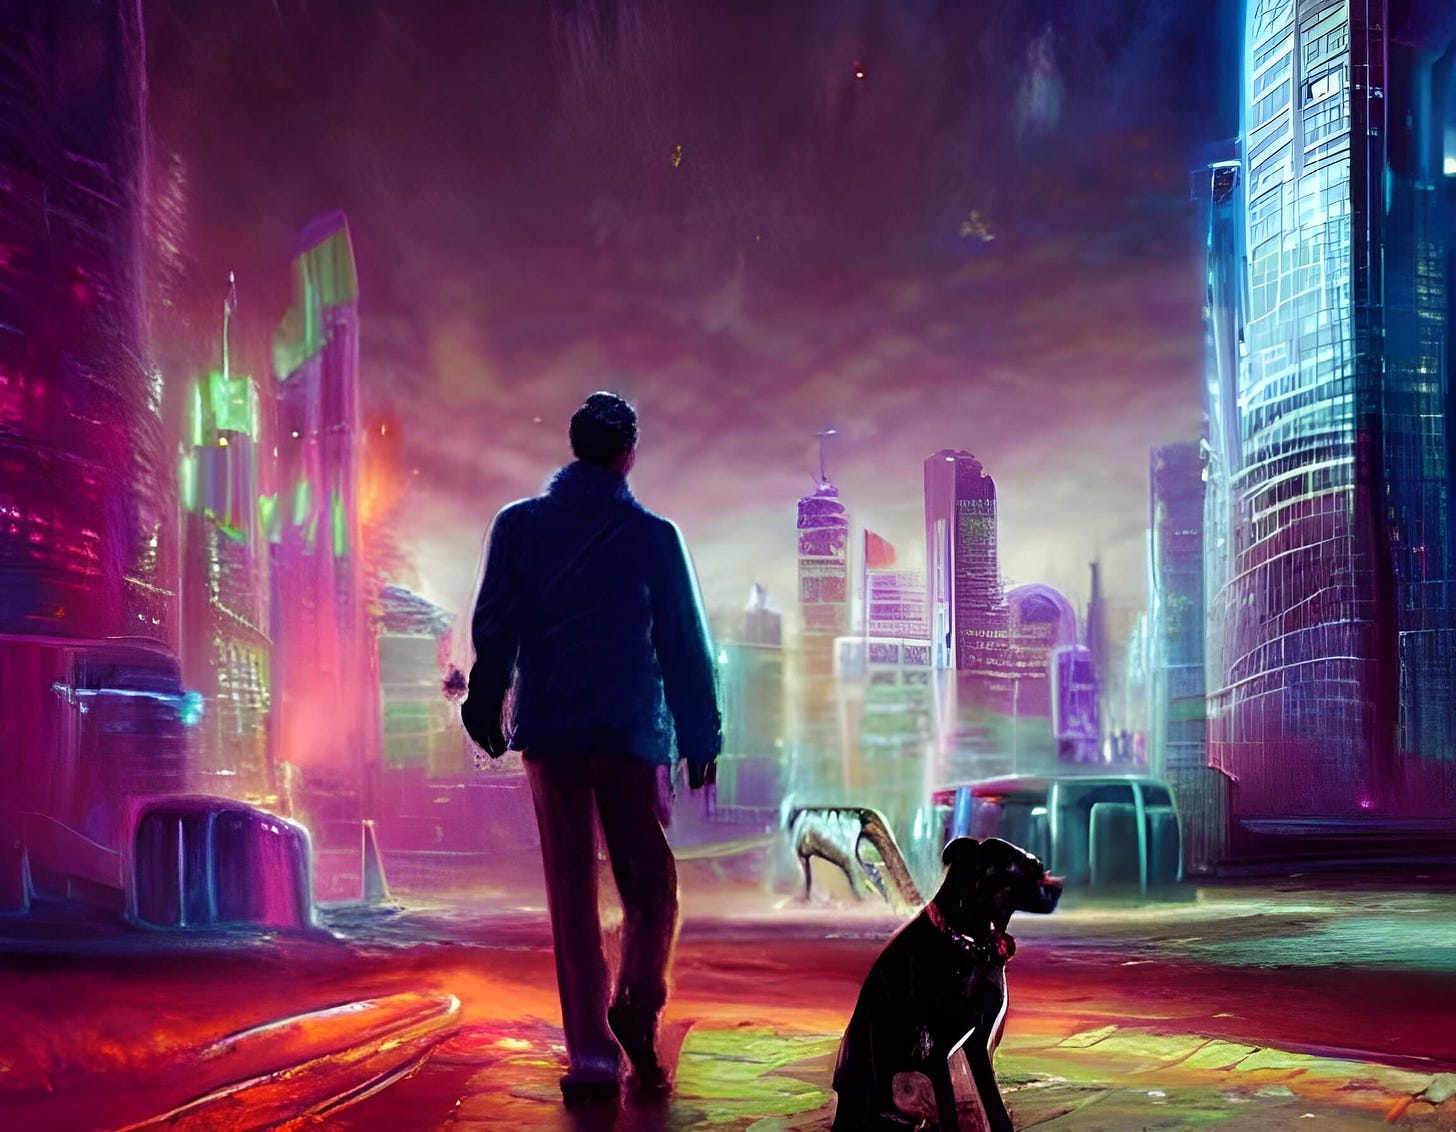 AI-generated painting of a man and dog standing in a futuristic city